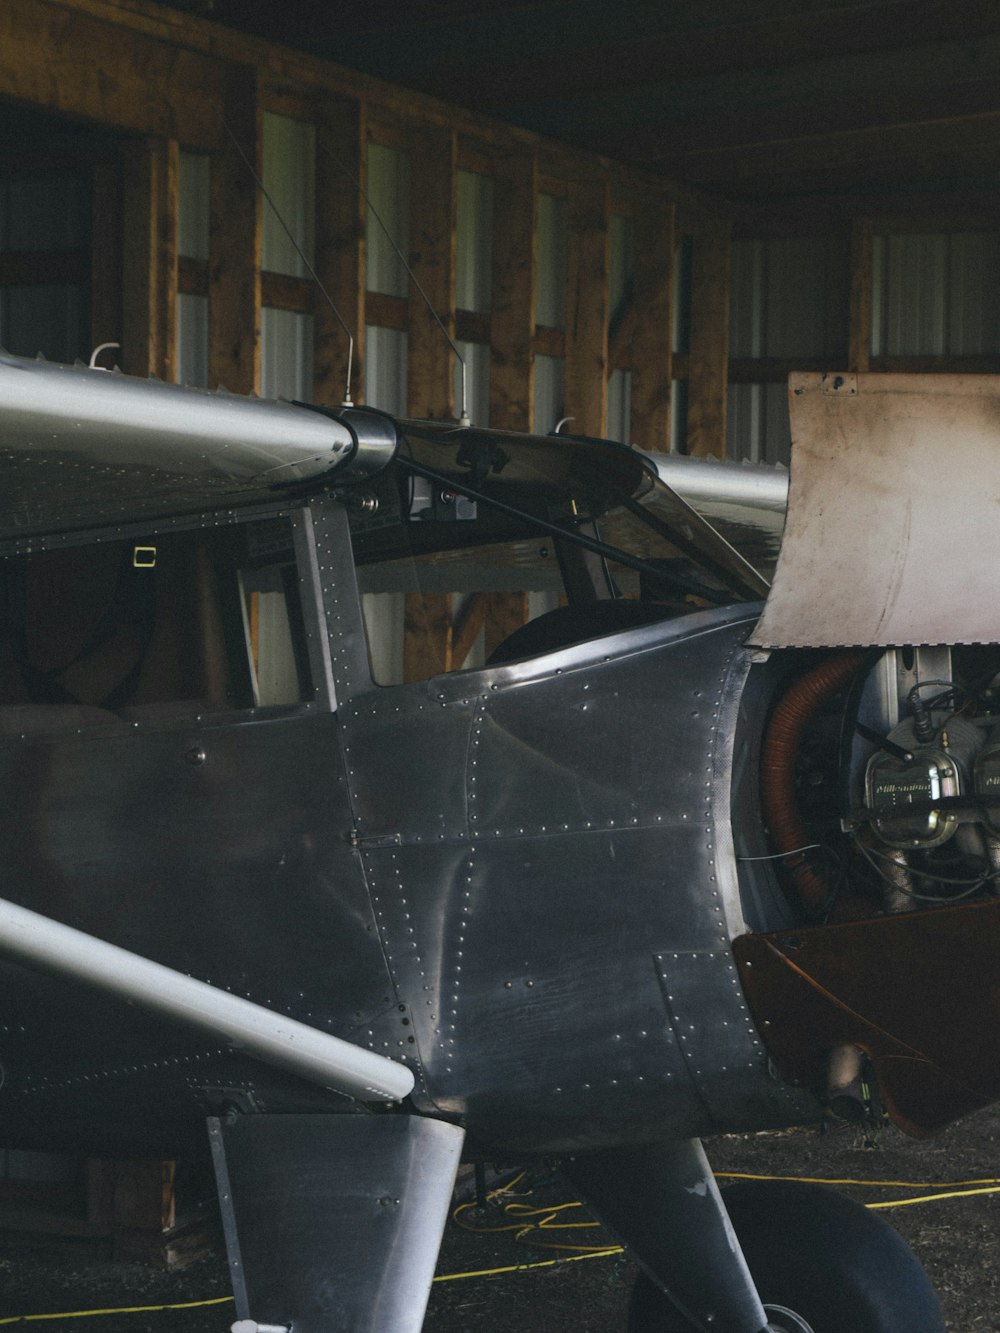 a small propeller plane sitting in a hangar